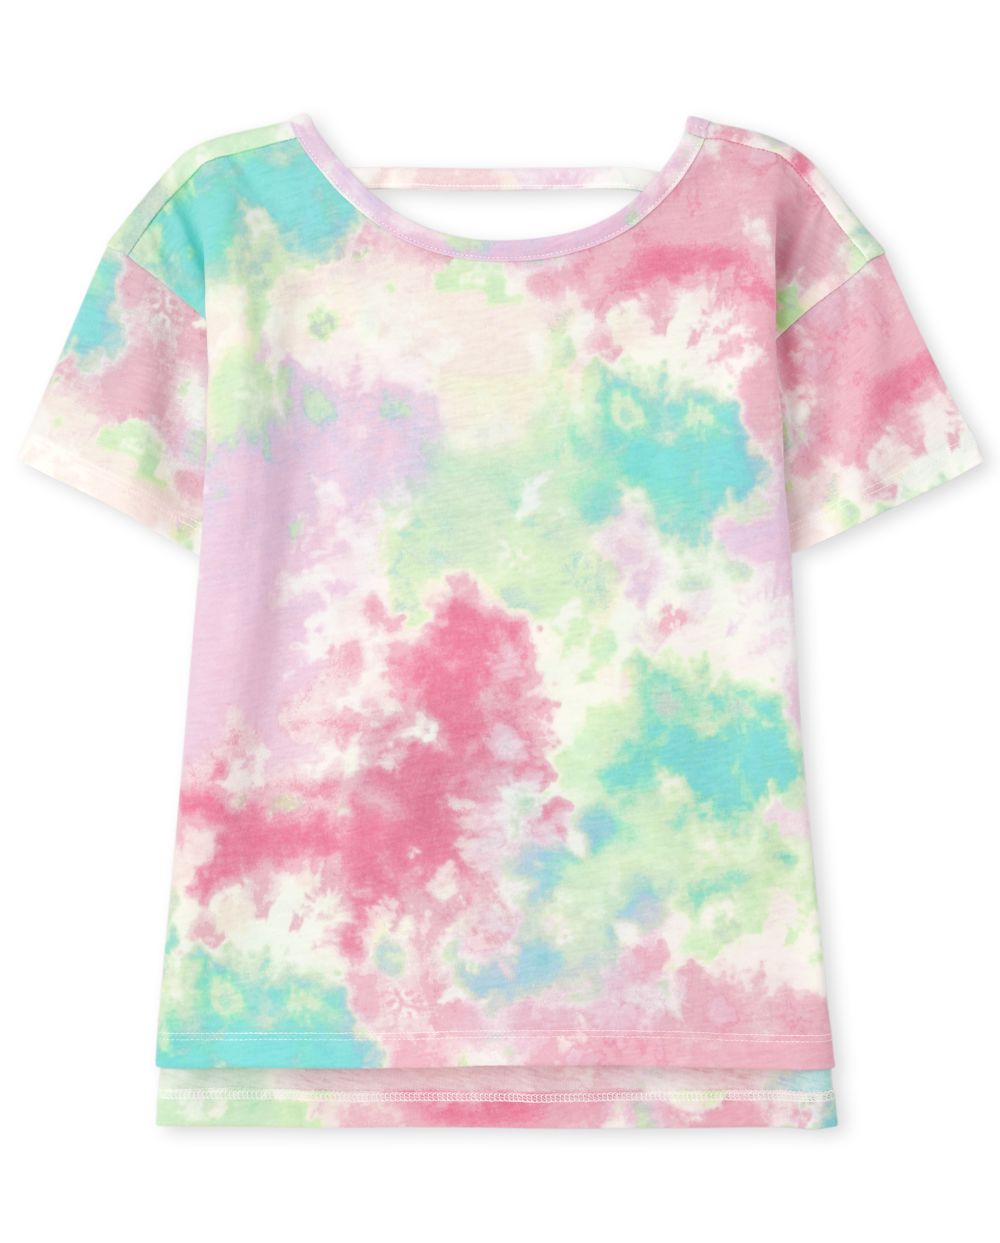 The Children's Place Girls Tie Dye Cut Out High Low Top | Size XS (4),S (5/6),M (7/8),L (10/12),XL (14),XXL (16), | White |...